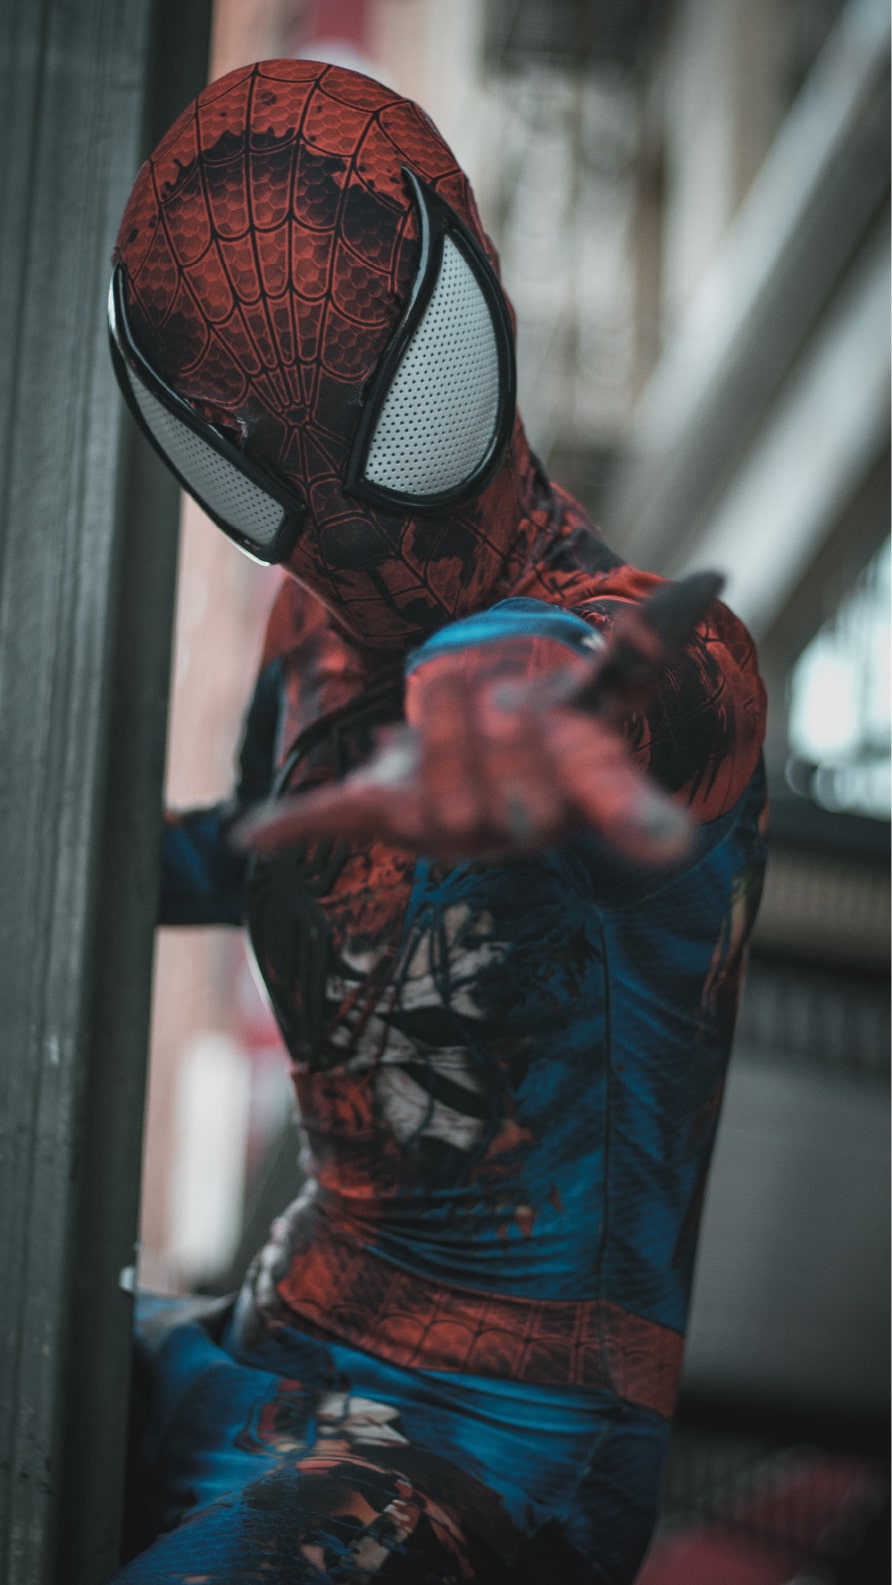 iPhone wallpapers featuring Spider-Man